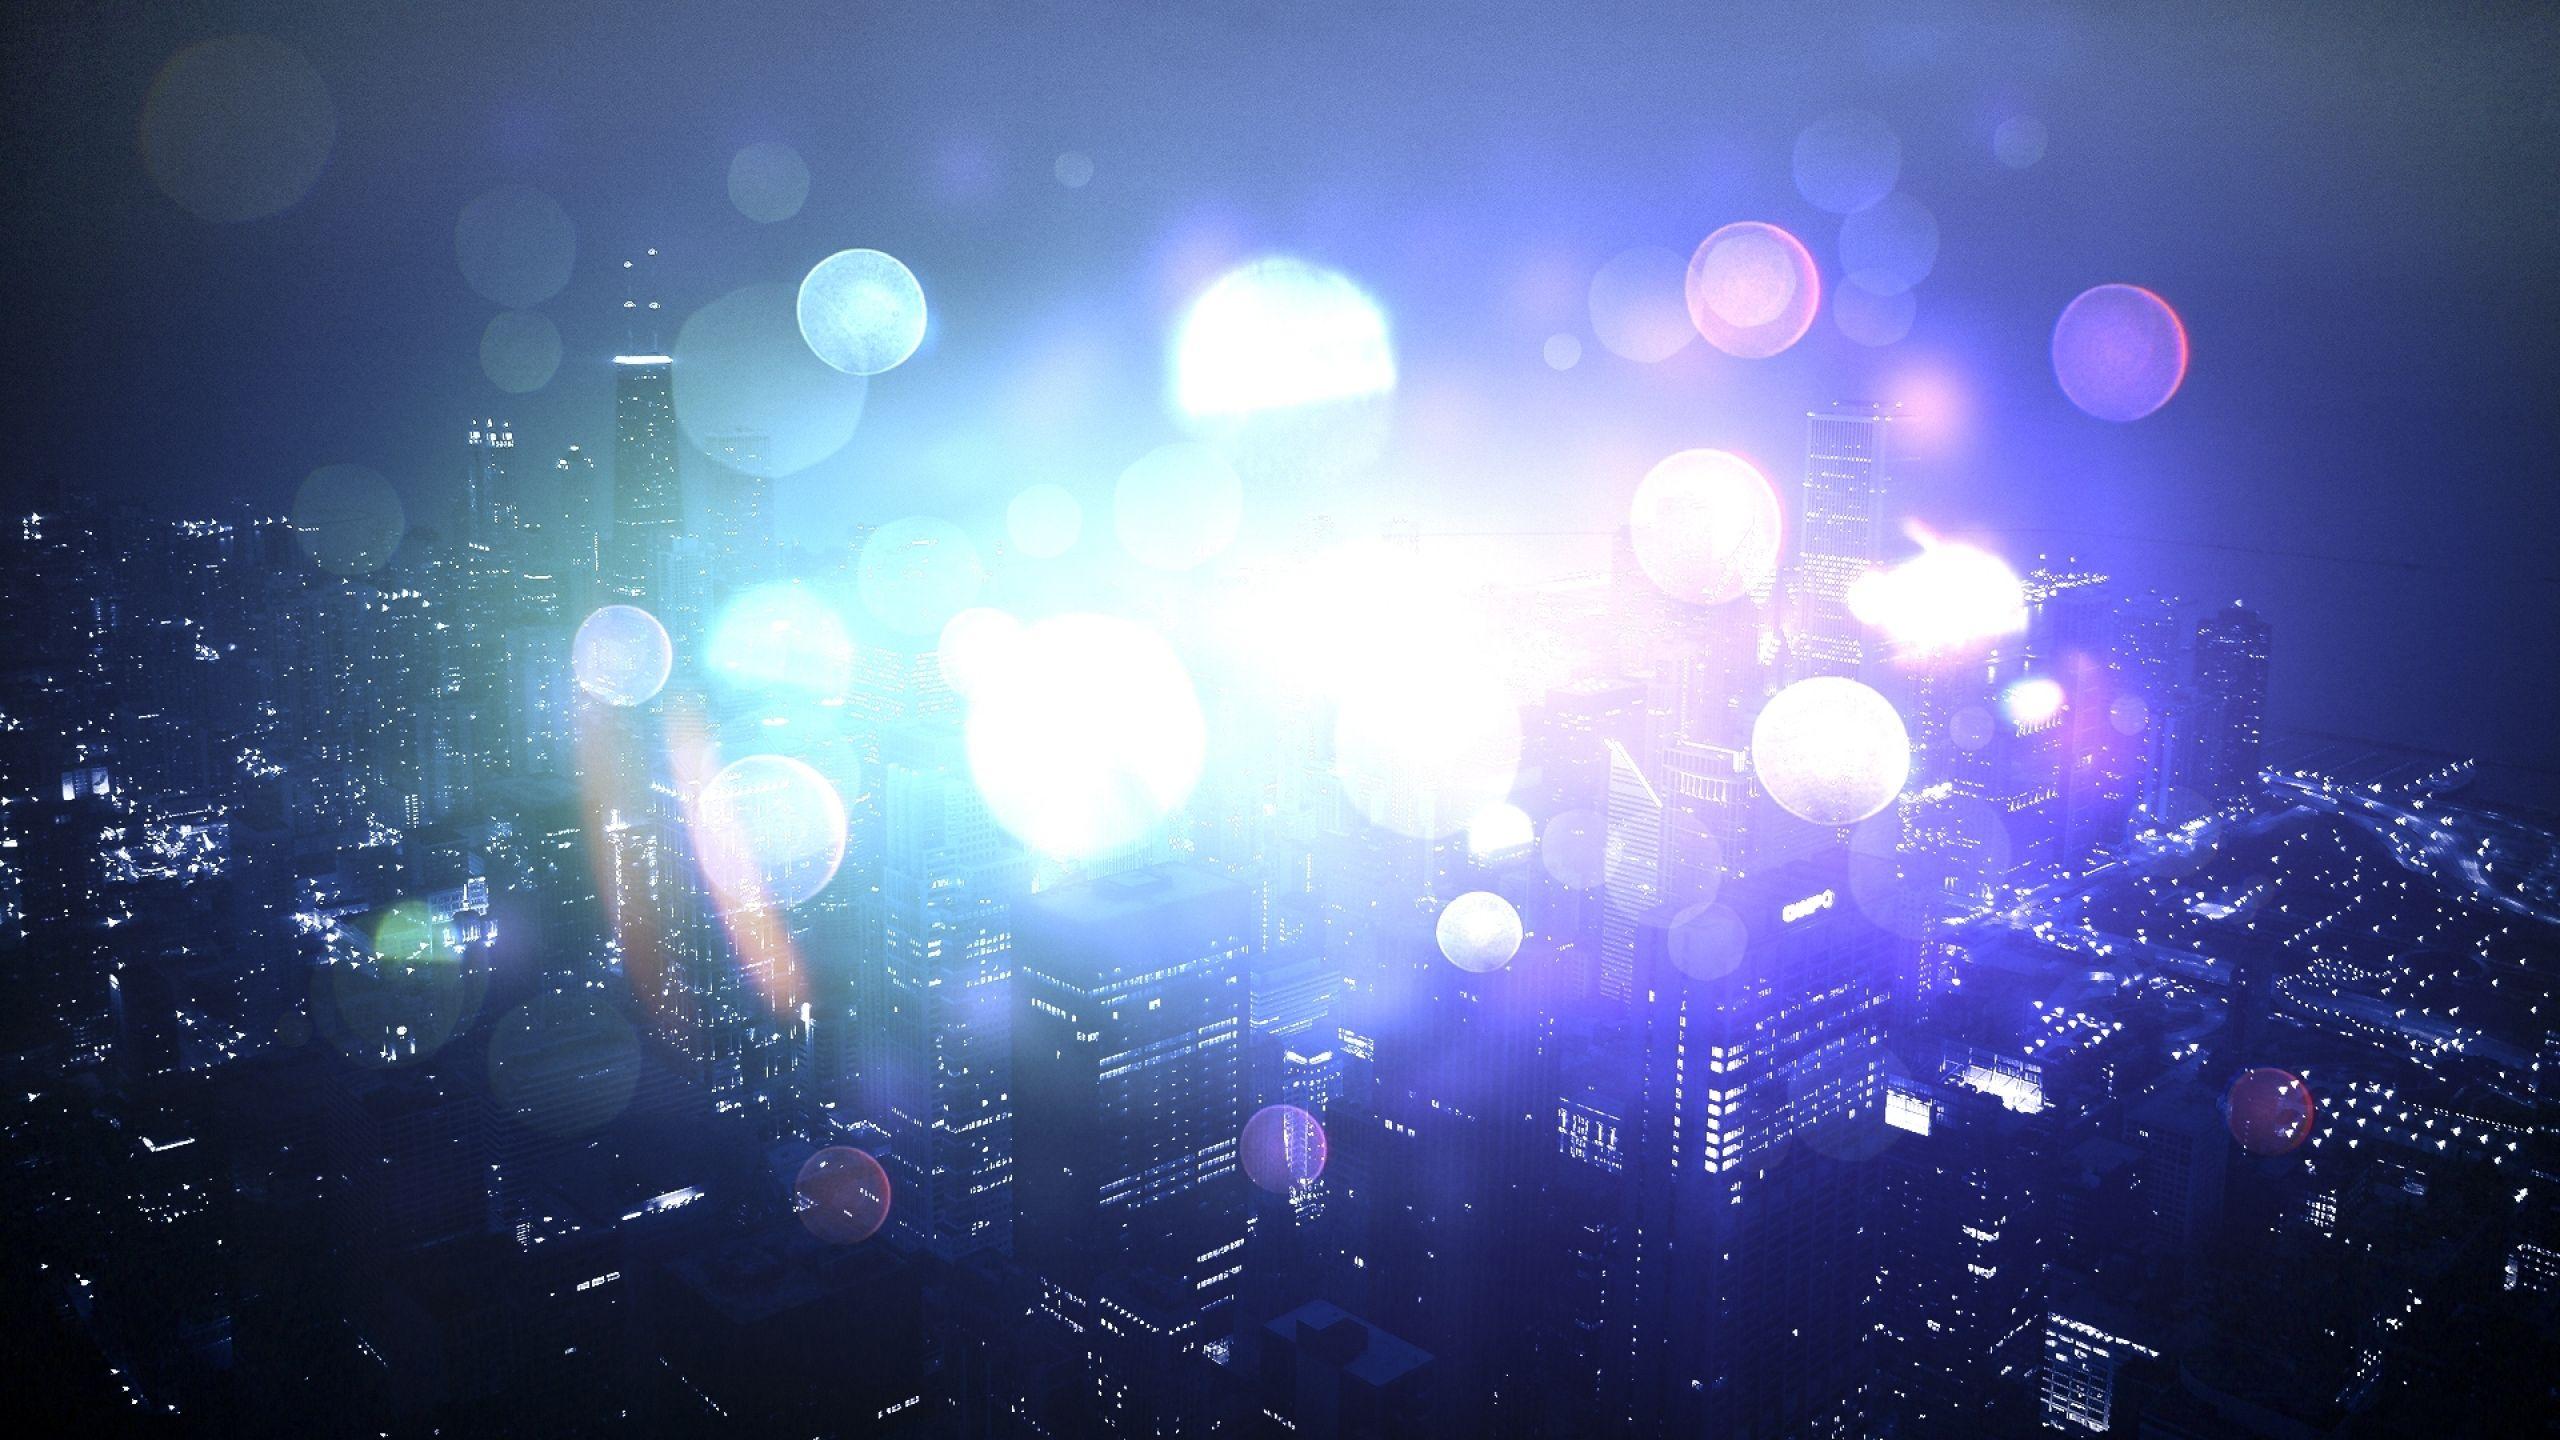 Download Wallpaper, Download 2560x1440 cityscapes lens flare Best